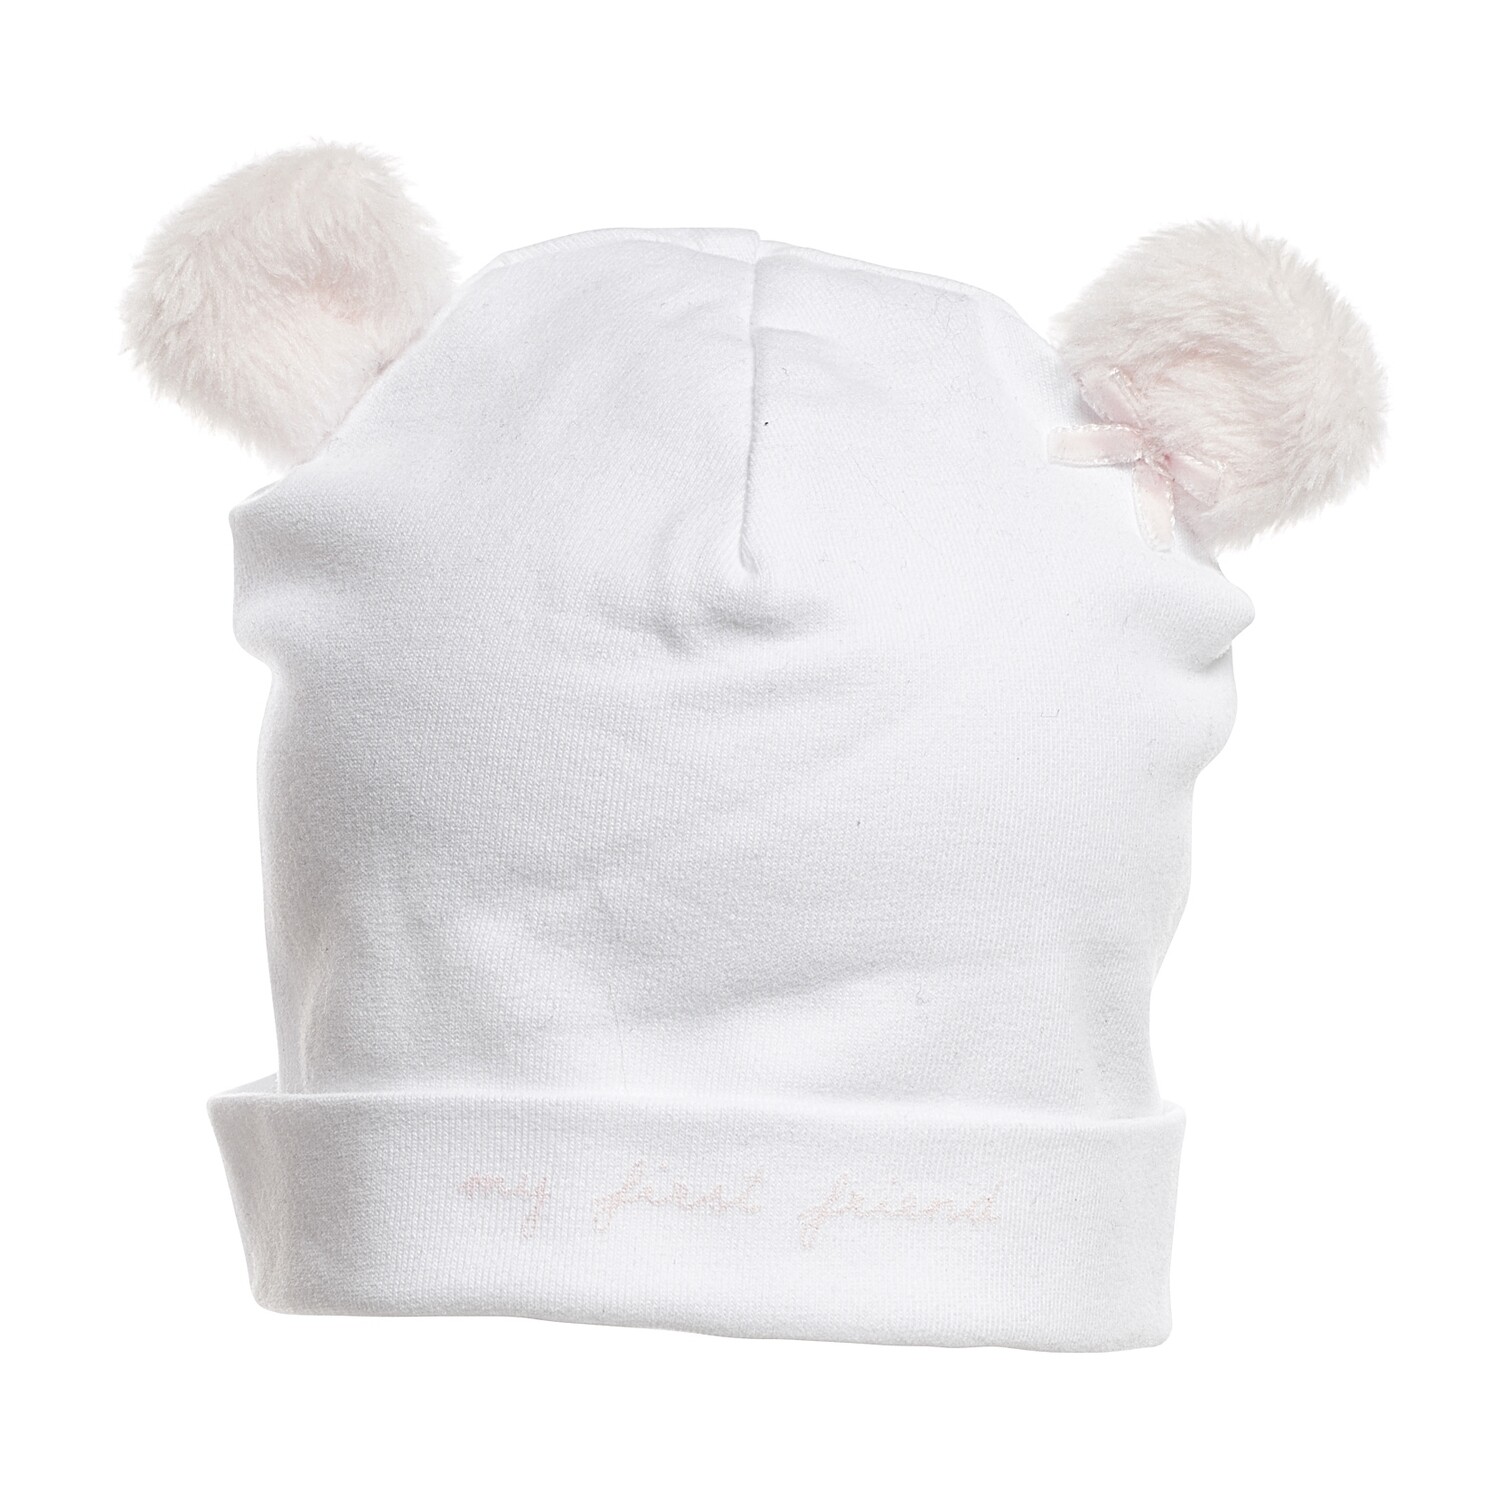 My First Collection G bonnet fur teddy bear ears - whi Pink